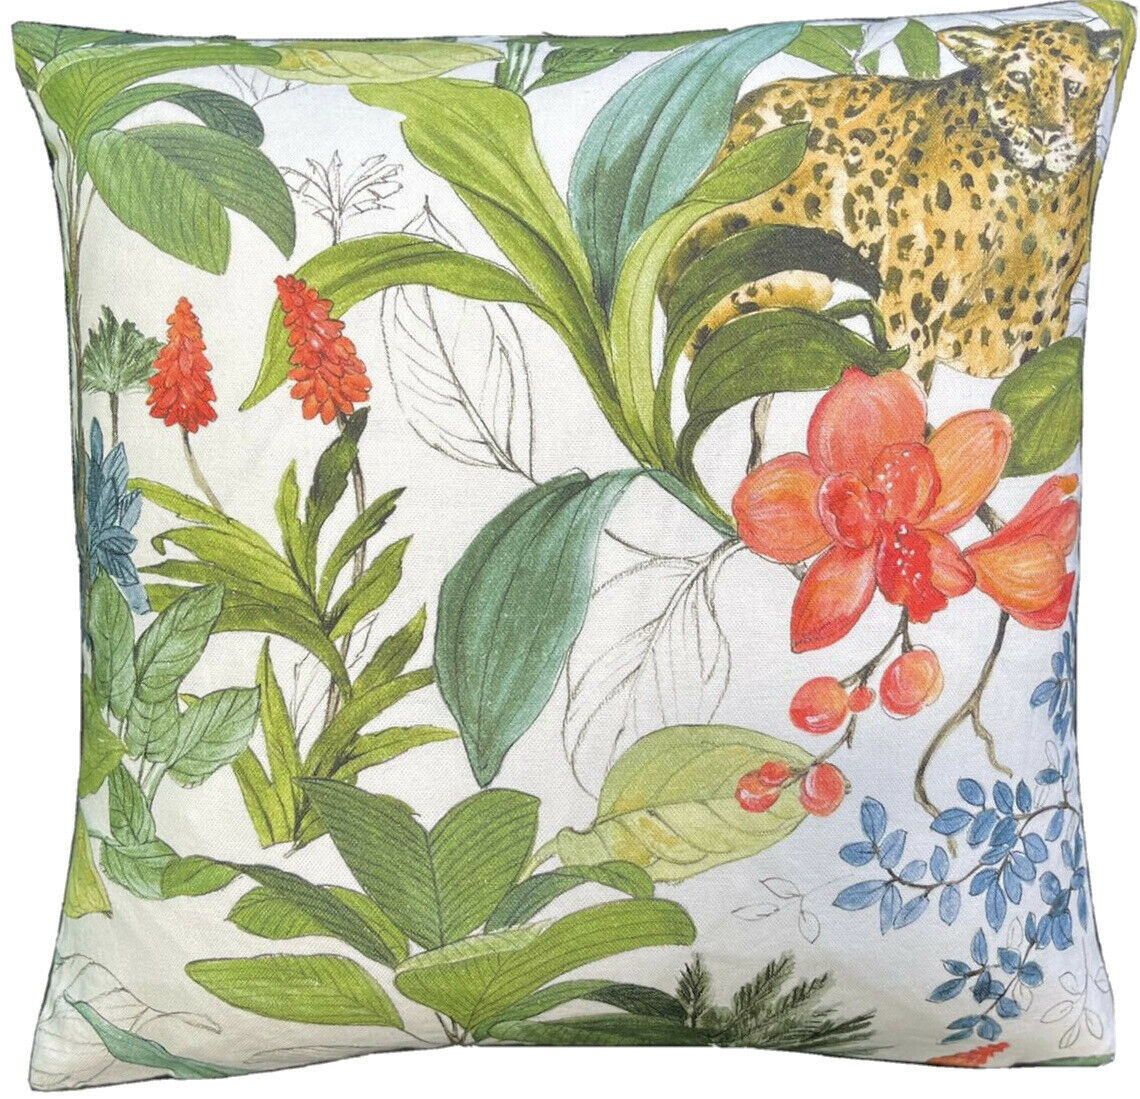 Leopard Orchids African Crowned Crane Bird Animal Print Cushion Cover Botanical